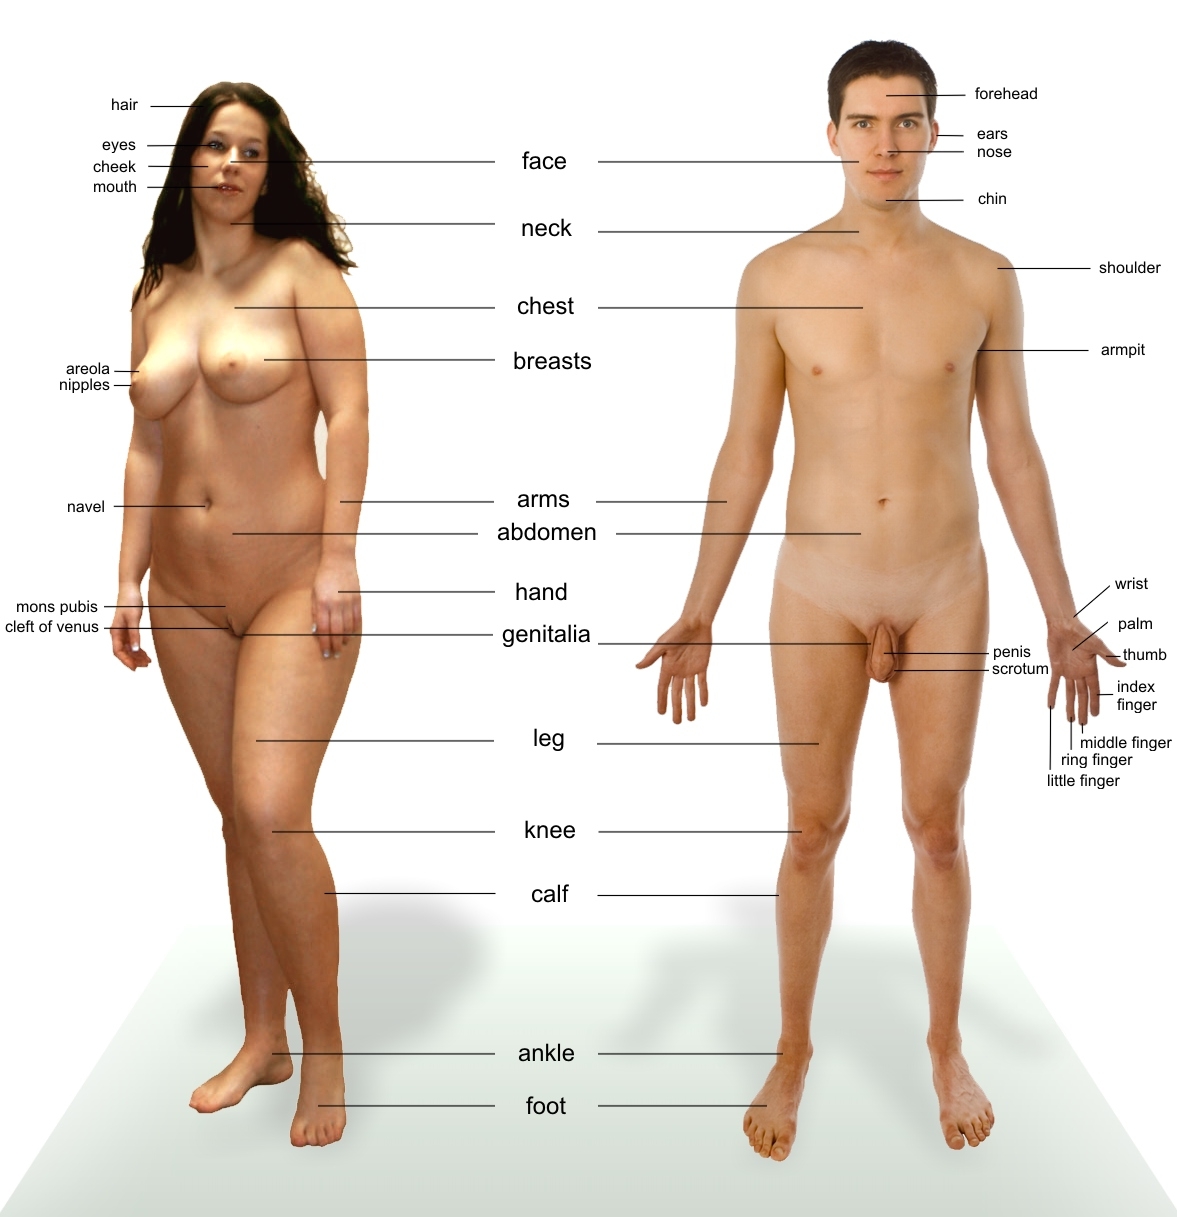 Major systems of the human body